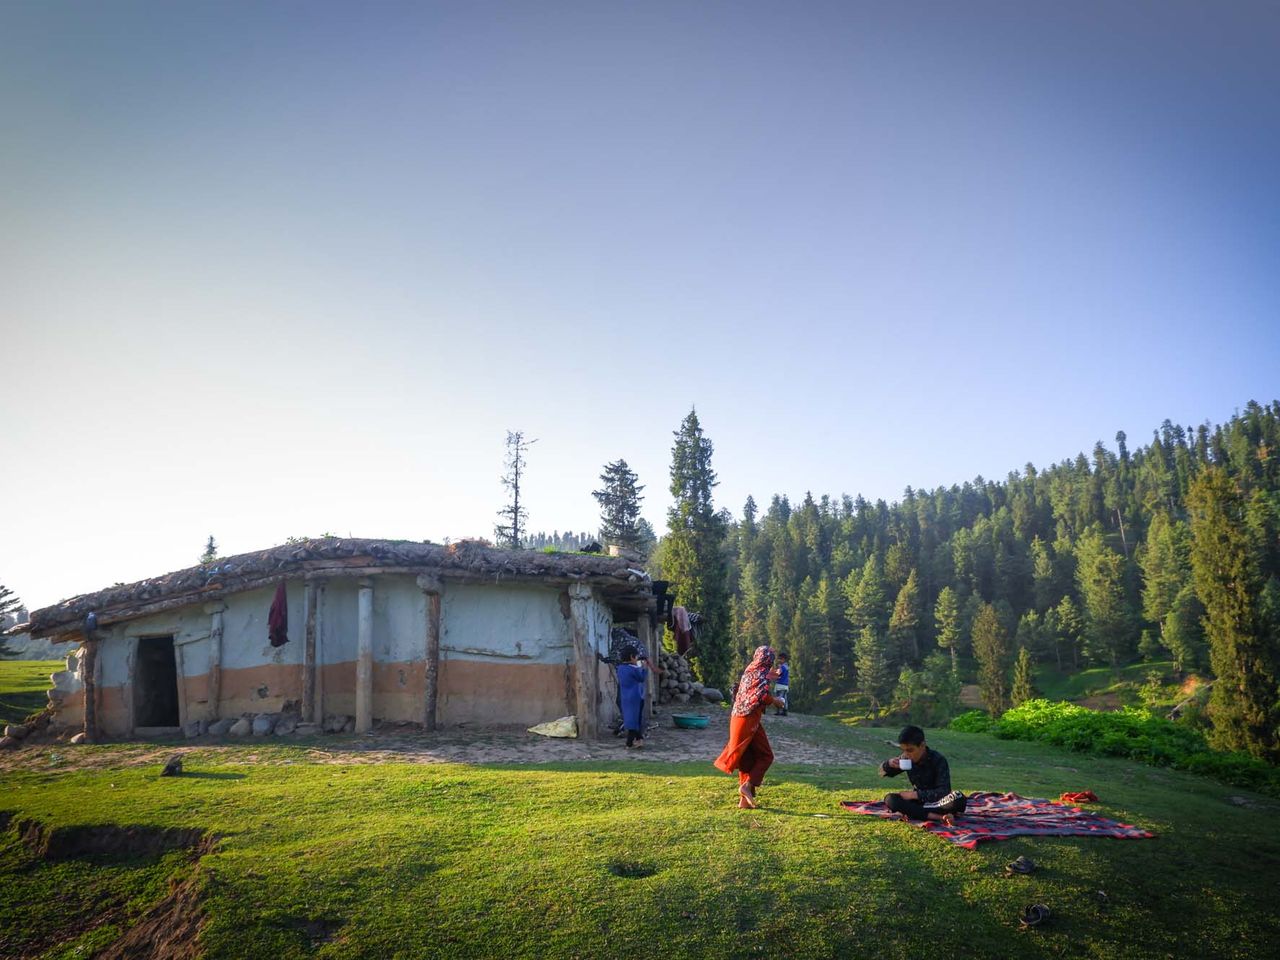 Children from a Gujjar family playing and having tea outside their mud-built house near Yousmarg, Kashmir around 50 kms away from the capital of Srinagar. Date: 11 May, 2022.